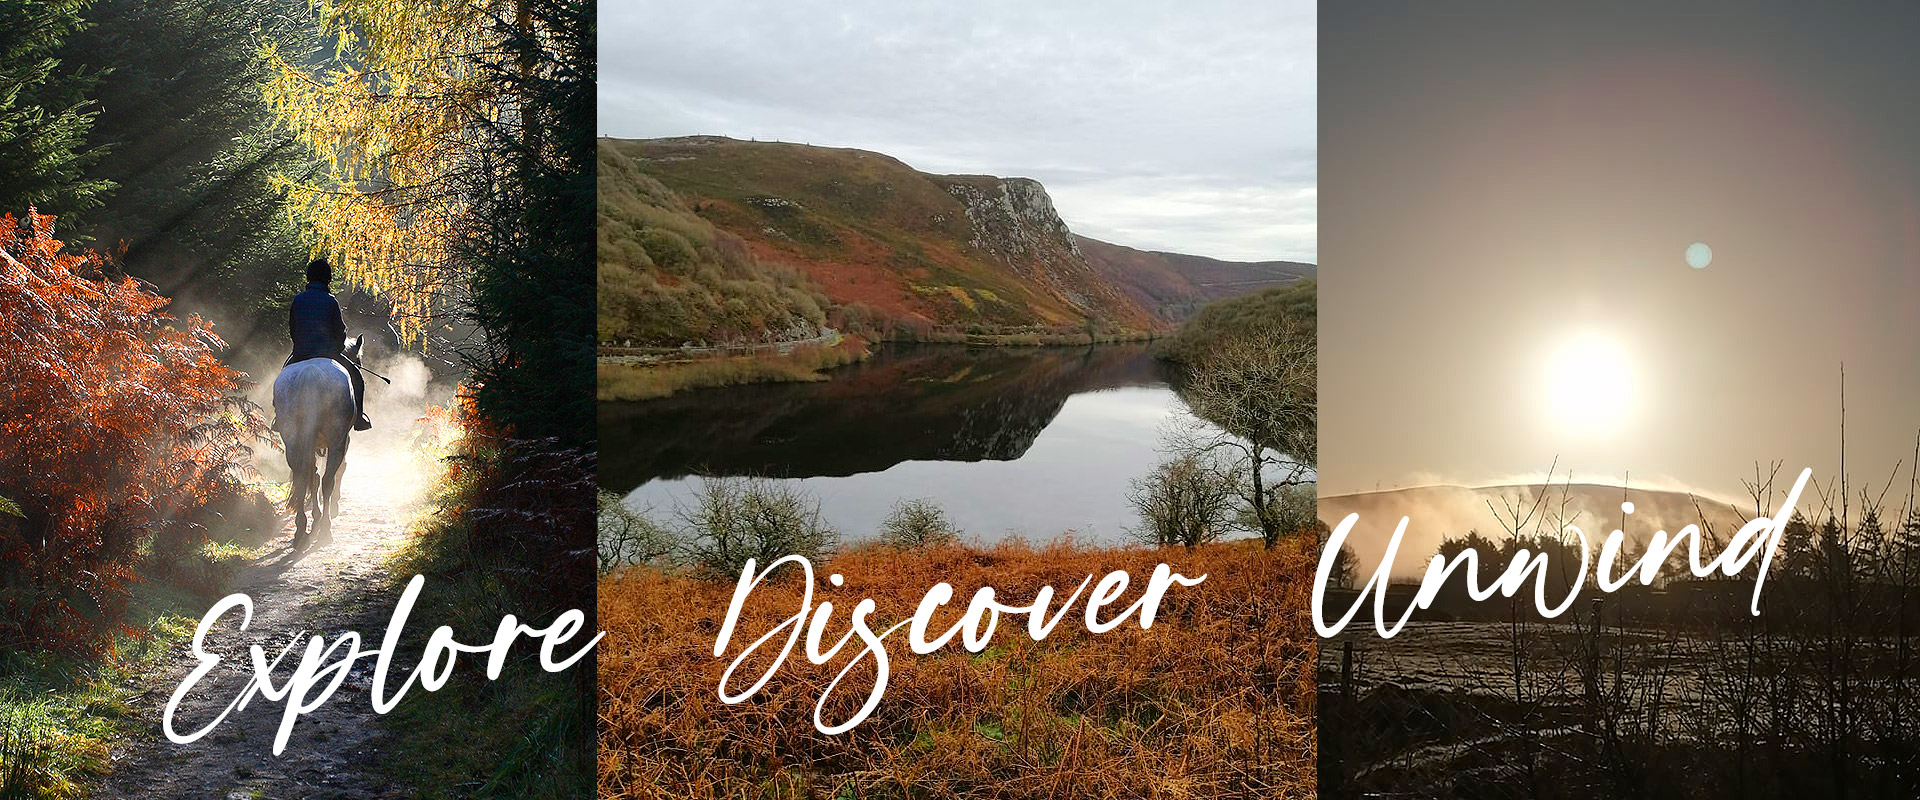 Discover scenic mid Wales and the local attractions